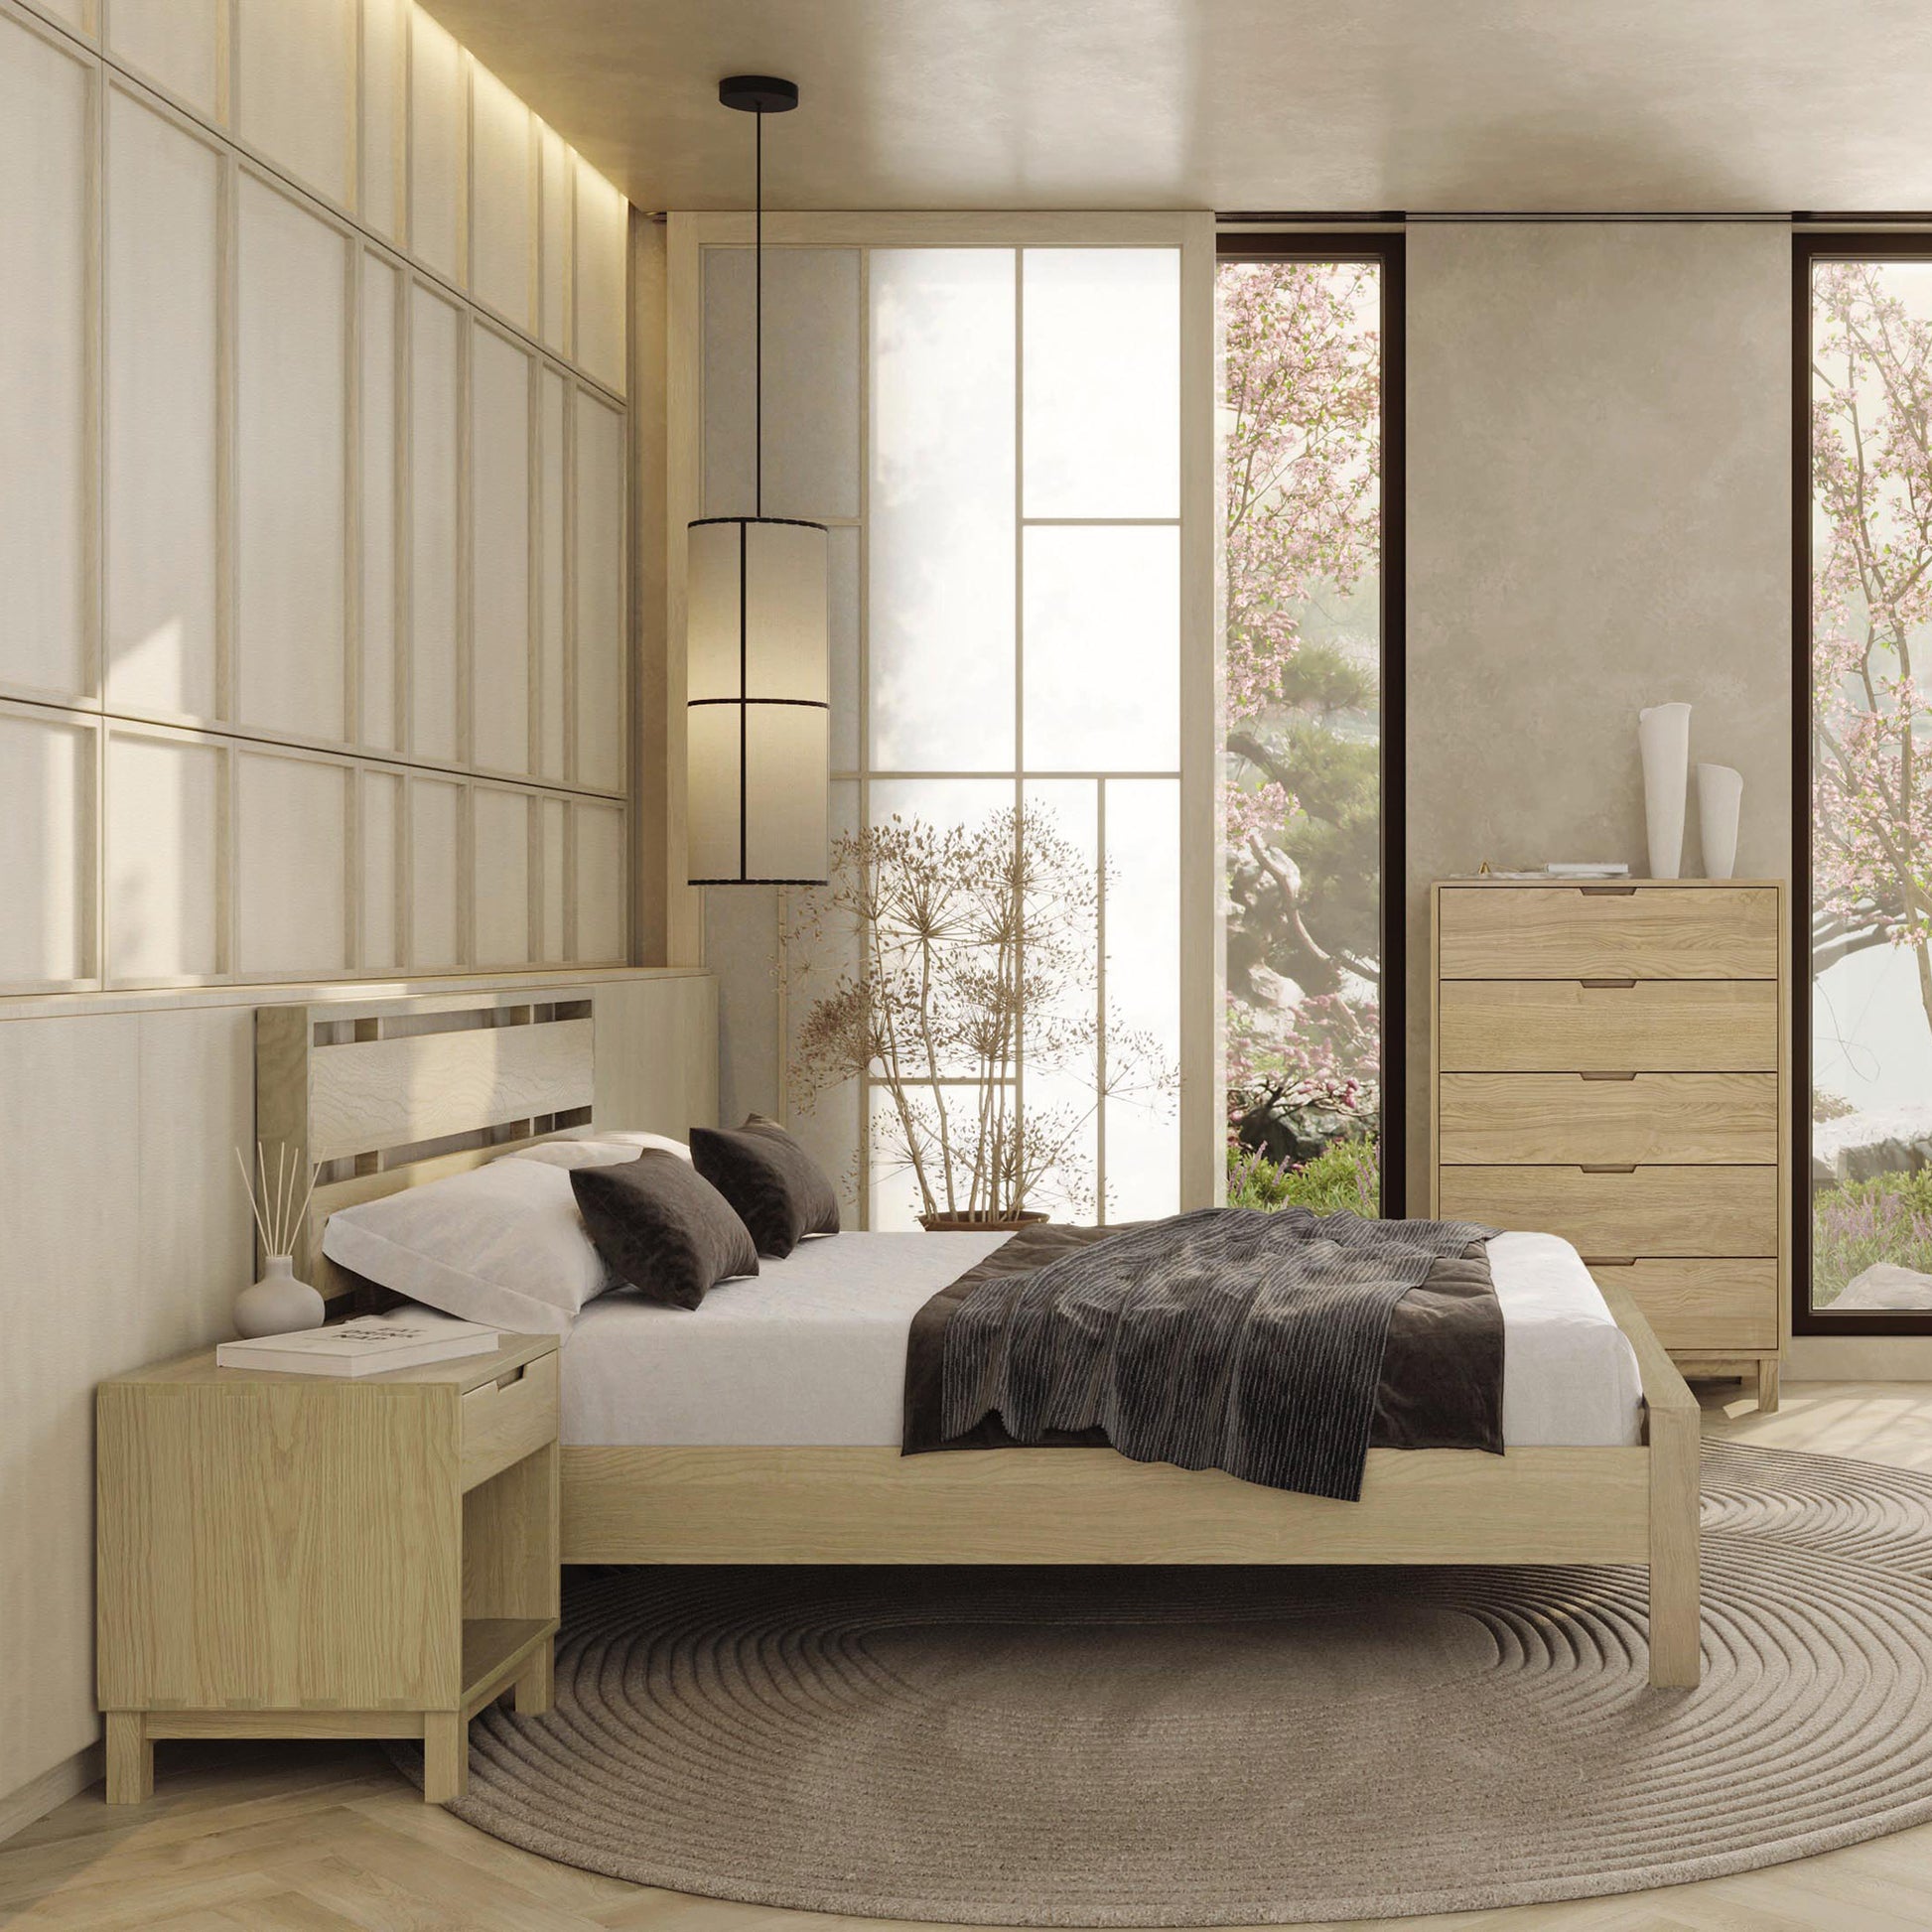 A contemporary bedroom featuring a solid oak hardwood Copeland Furniture Oslo Platform Bed with a white mattress, a bedside table, a dresser, and a circular rug on the floor. Natural light floods in from a large window with